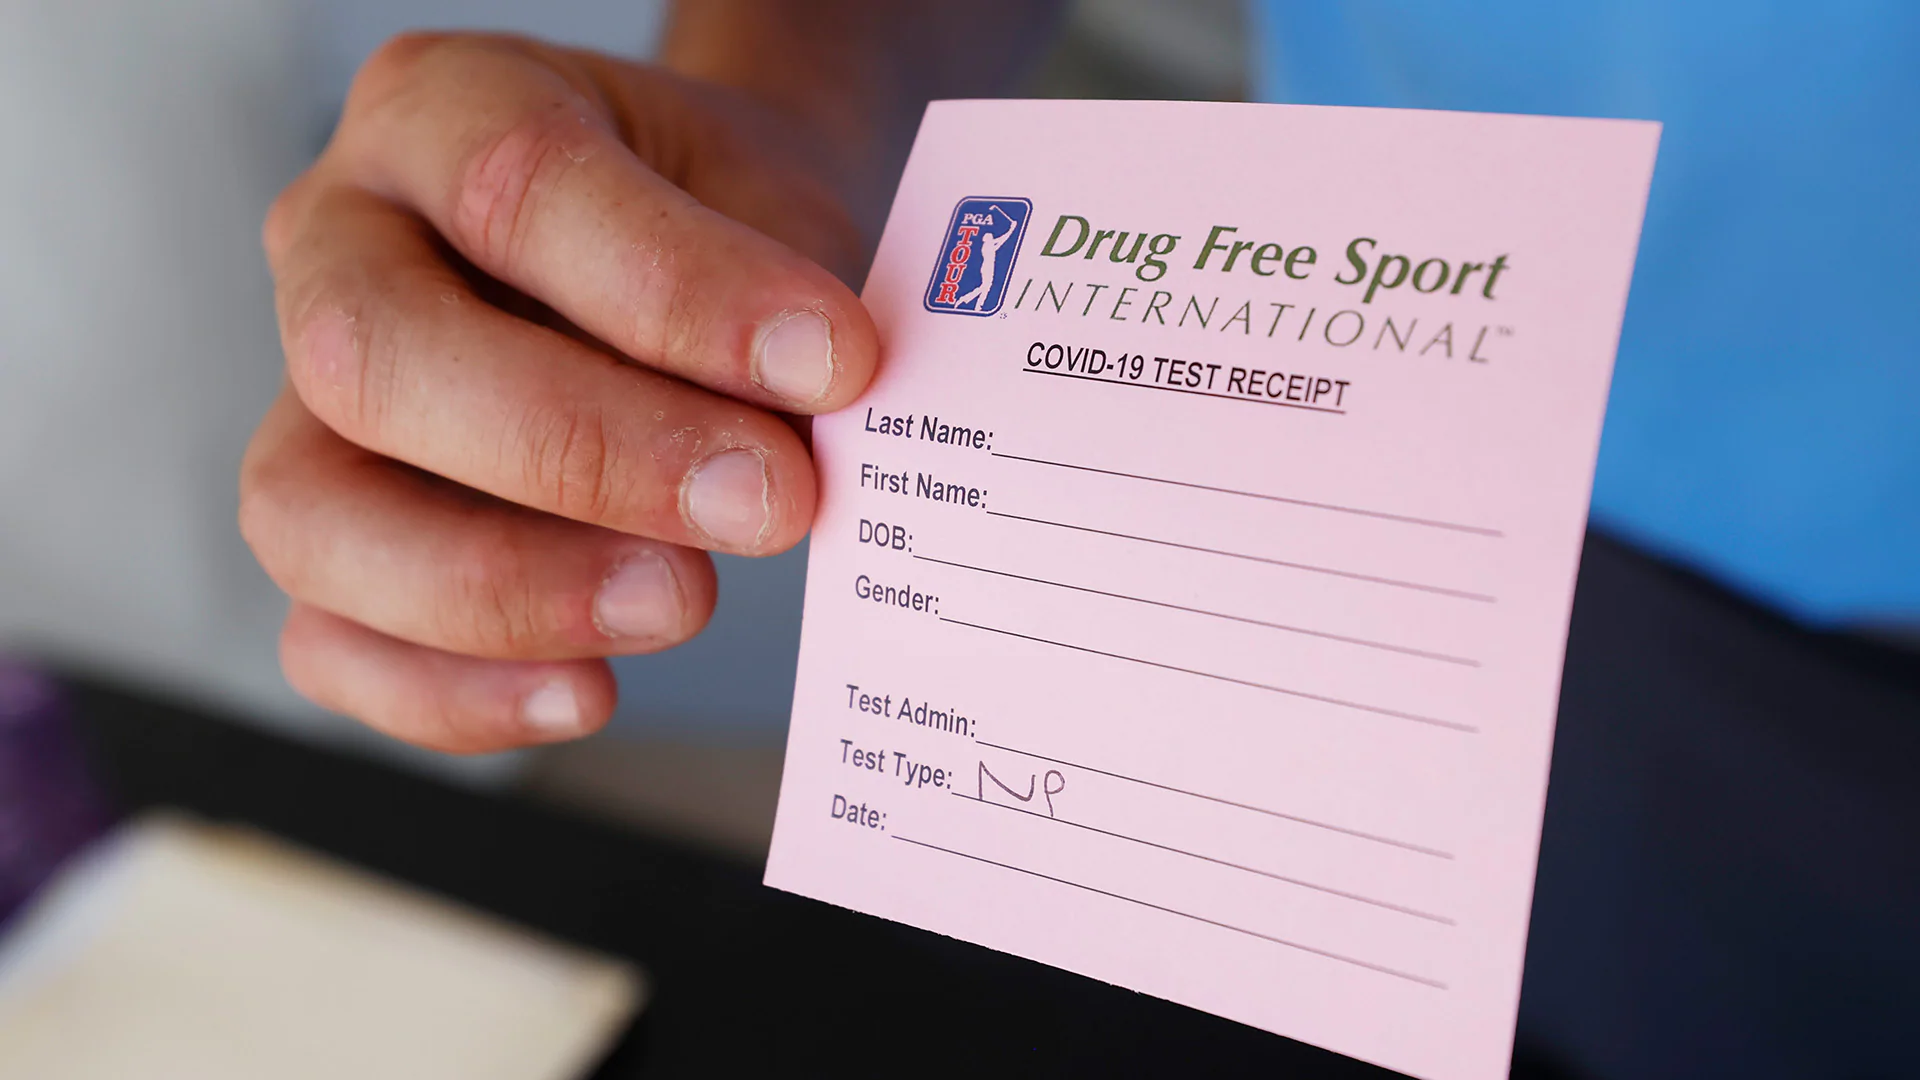 Players, caddies who test positive can return to play with certain restrictions